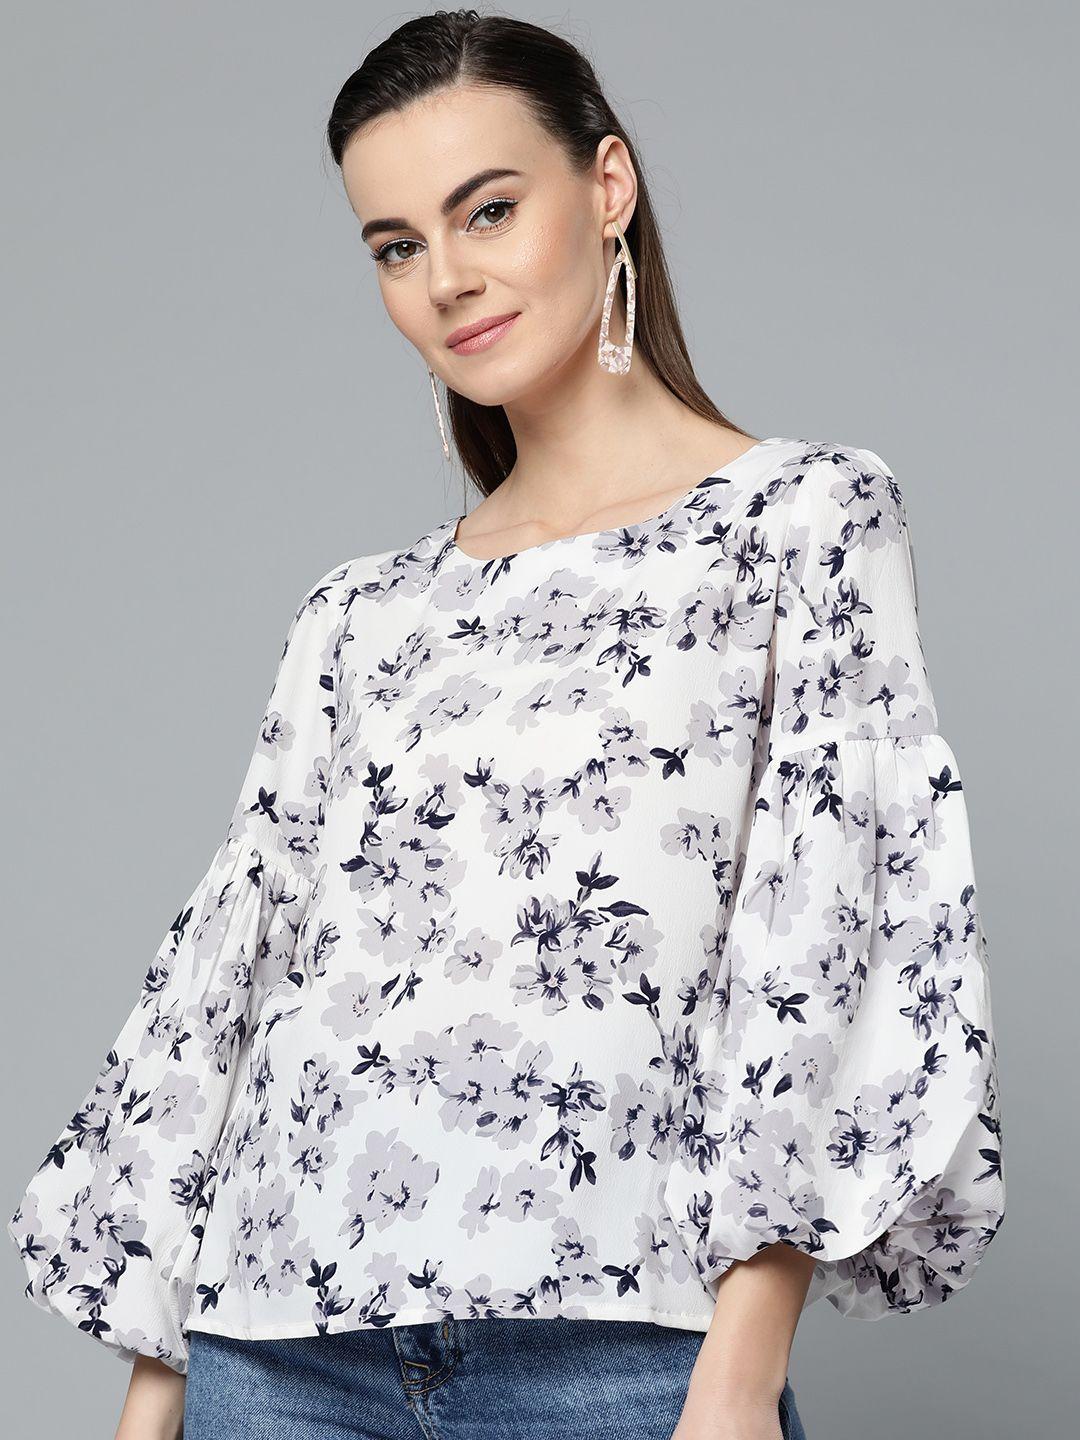 marie-claire-women-off-white-&-navy-floral-print-top